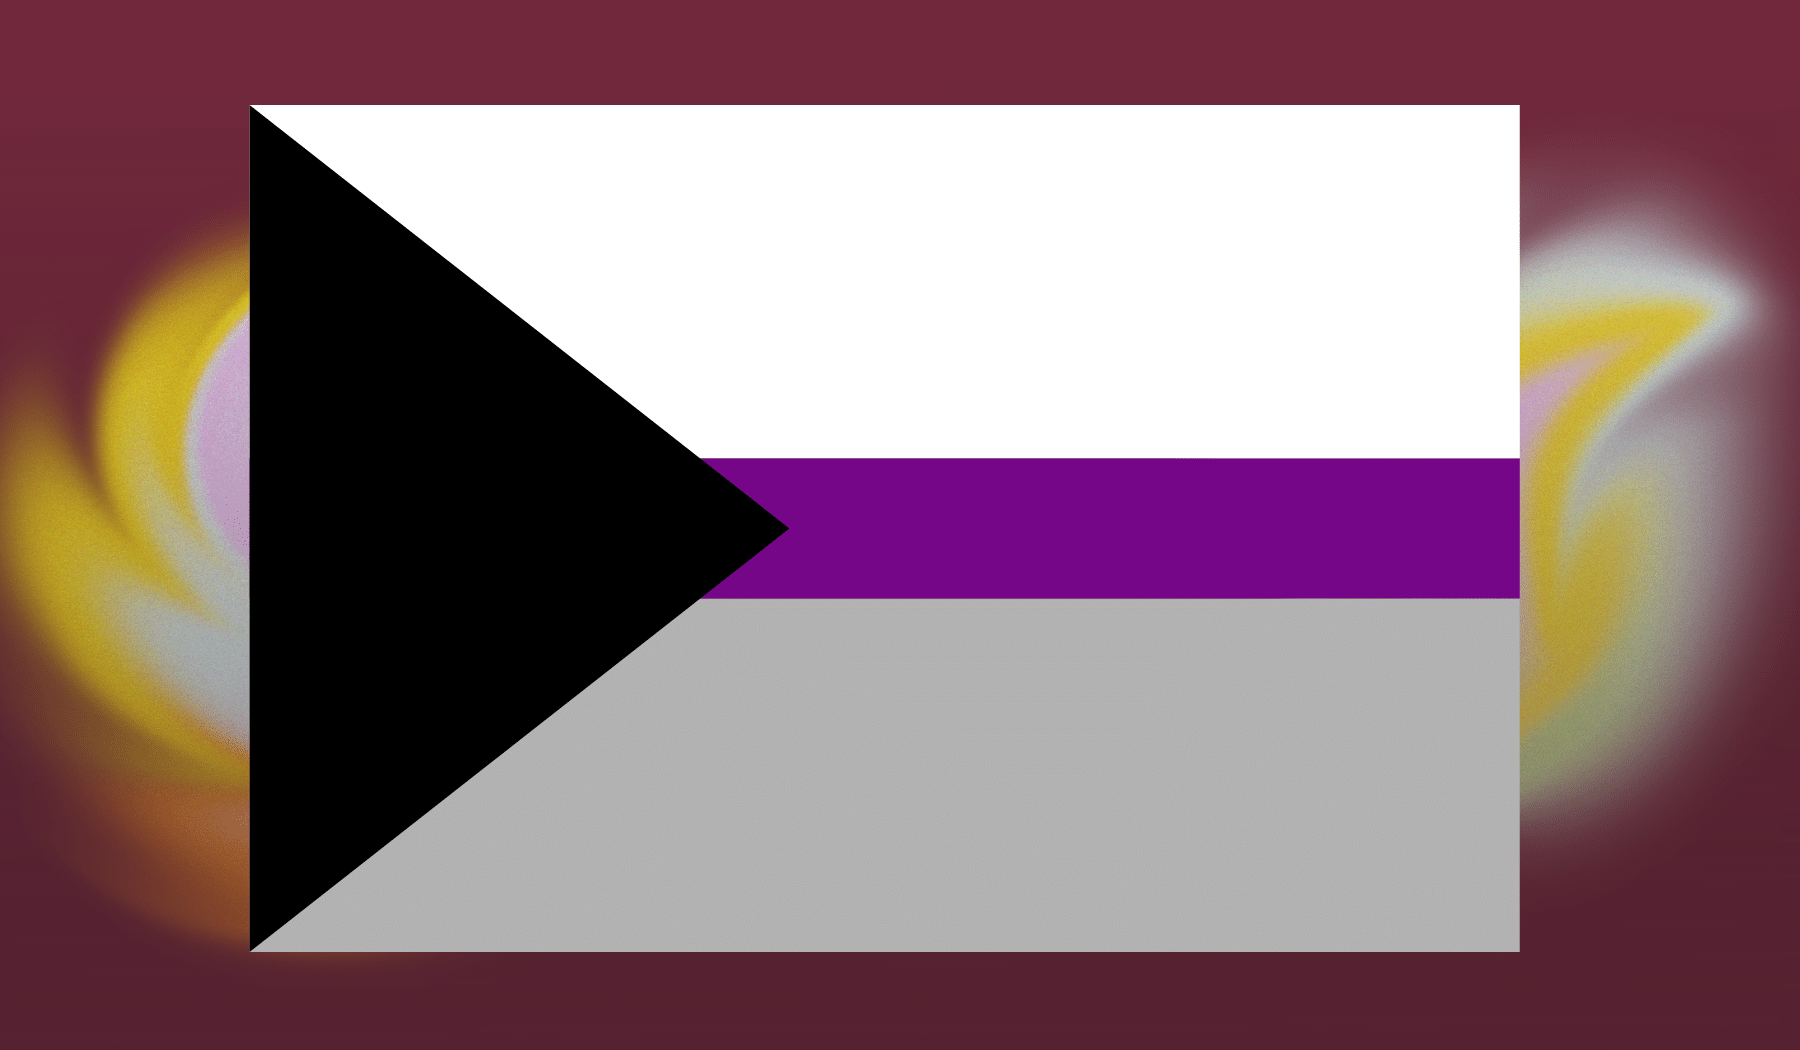 The demisexual flag consists of a black triangle, with white stripe, purple stripe and grey stripe